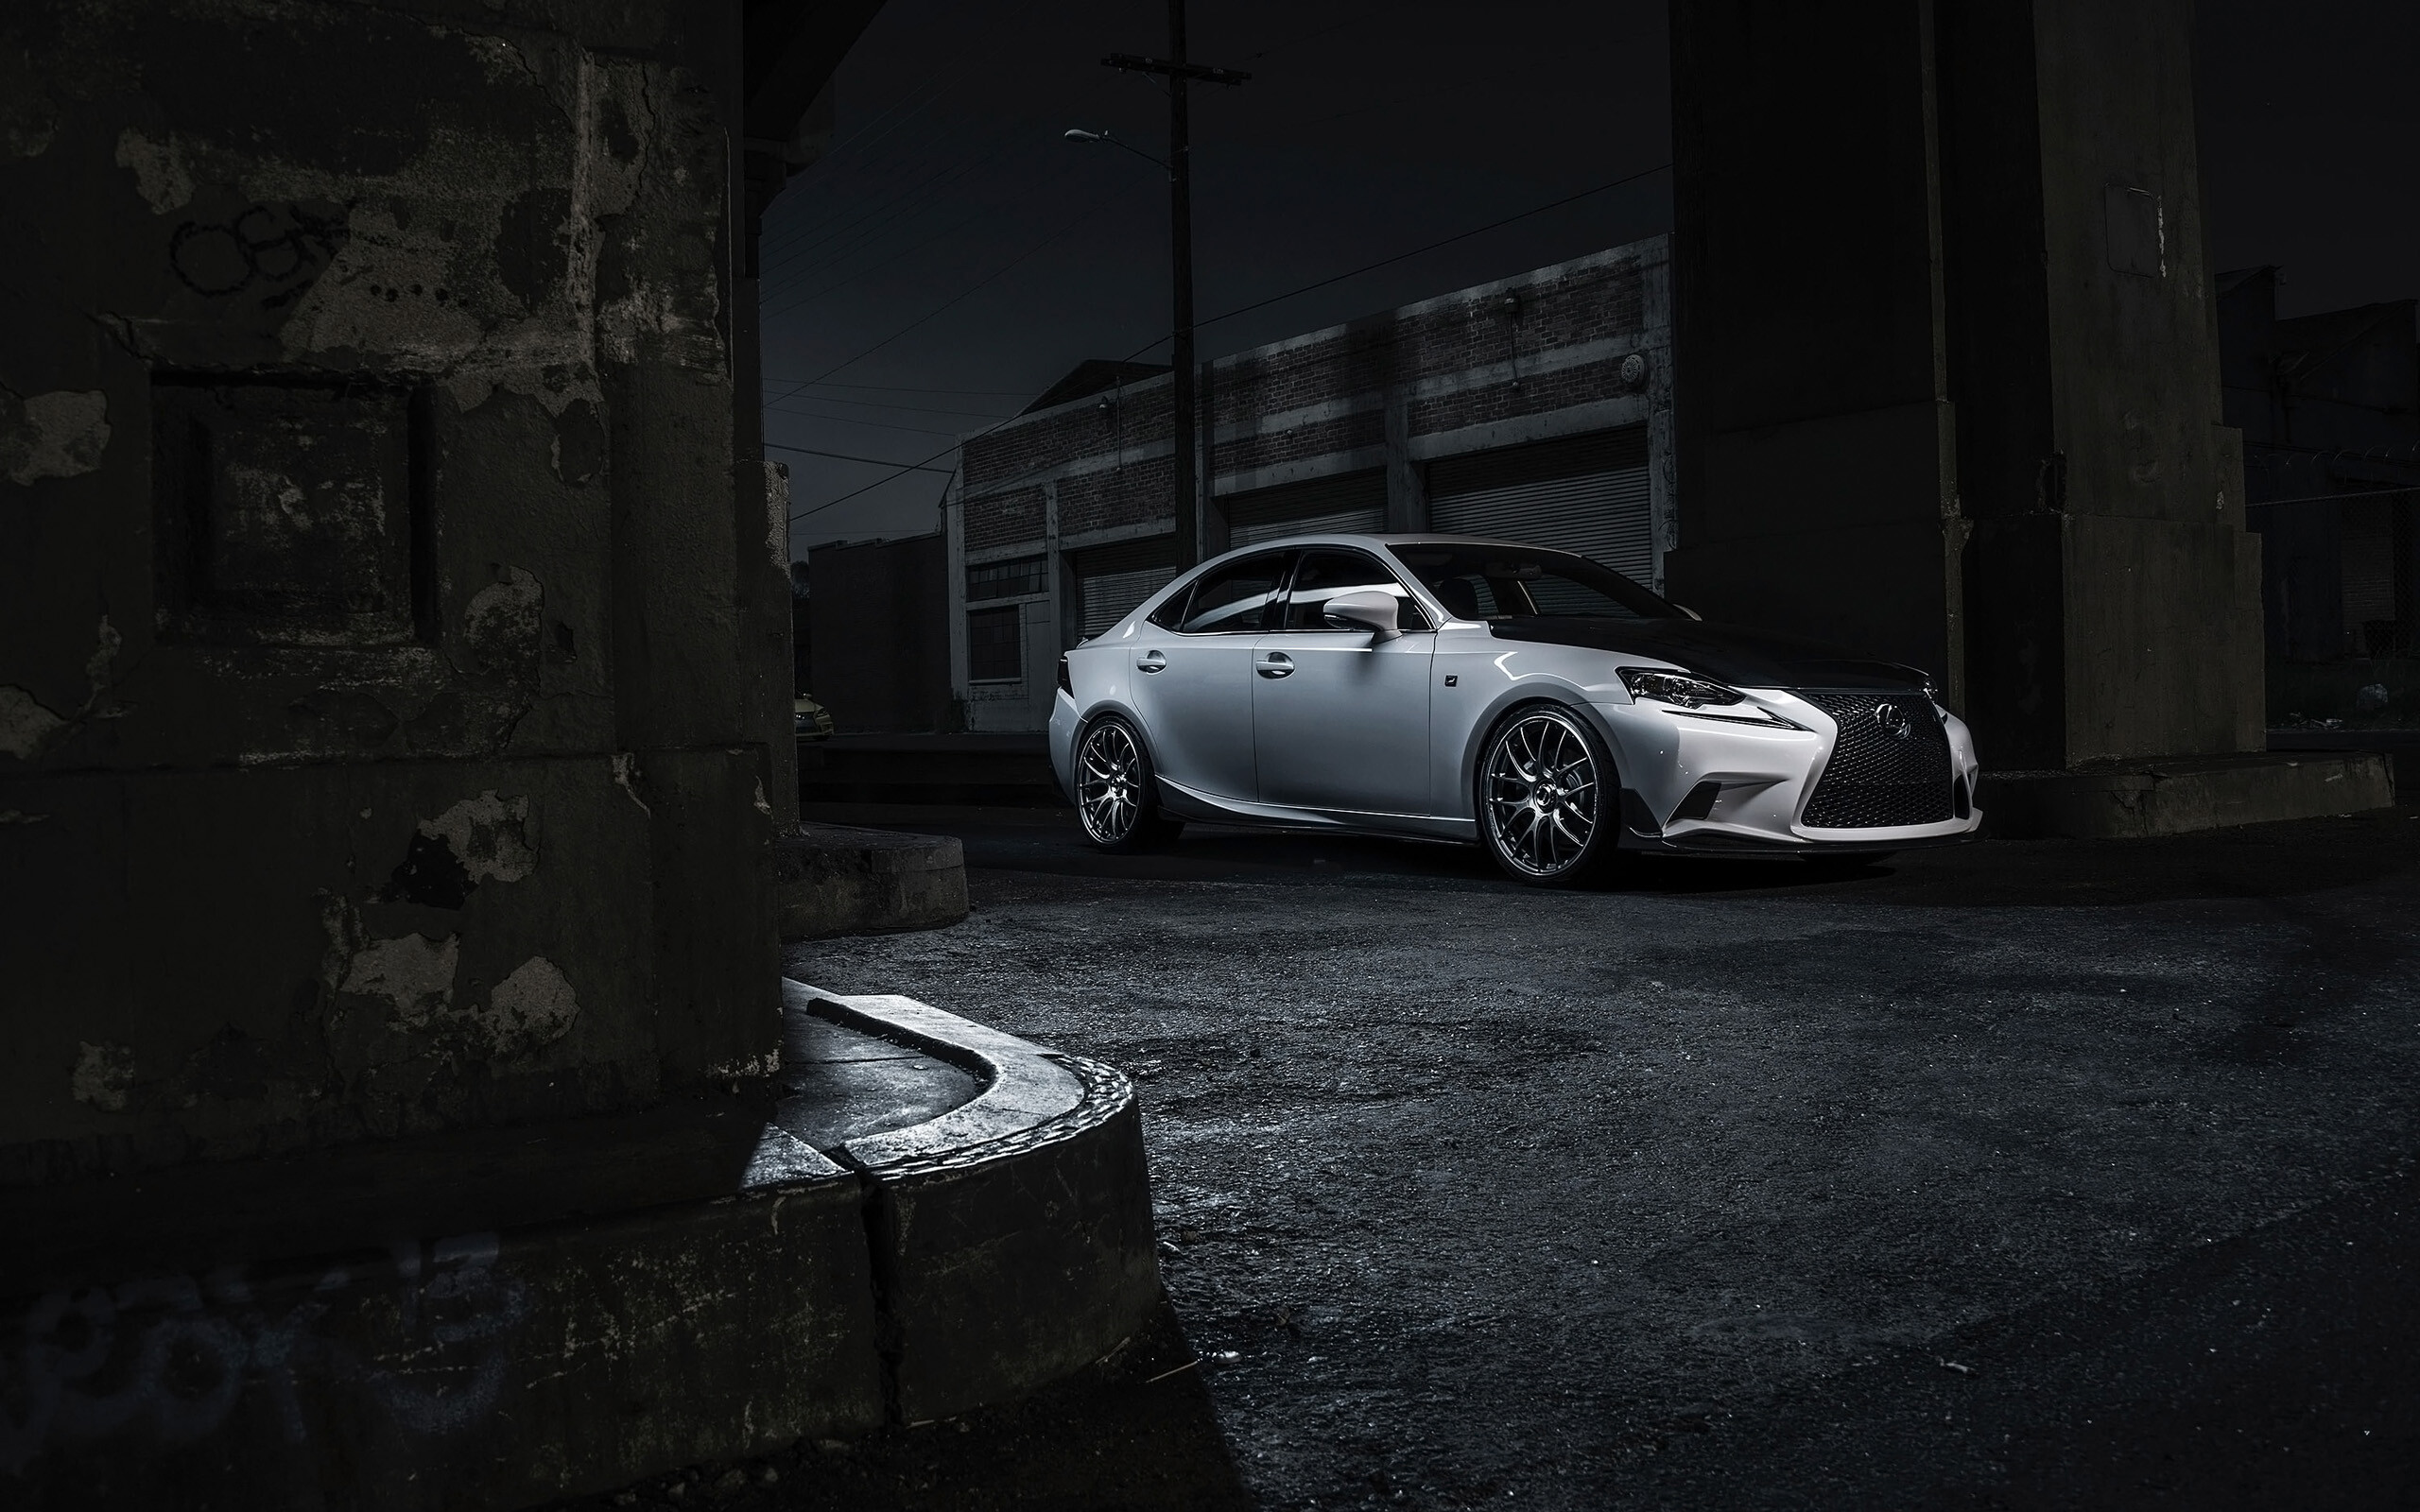 Lexus: Toyota's luxury division, Employs a simple alphanumeric naming system, IS. 2560x1600 HD Wallpaper.